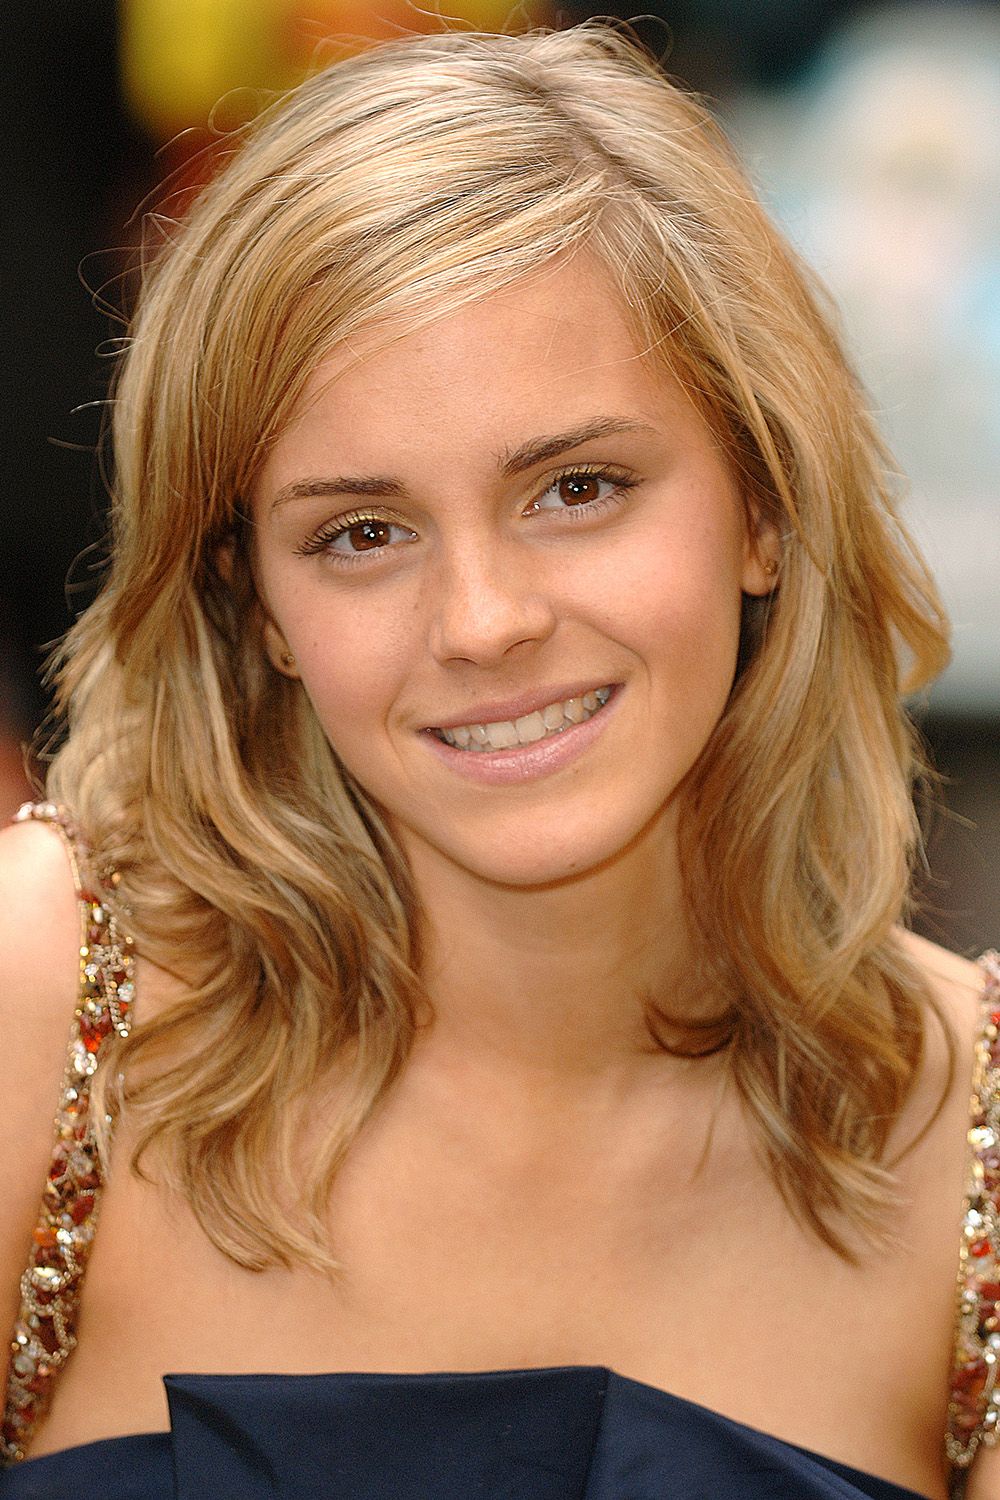 Emma Watson's Best Hairstyles - Emma Watson Haircuts and Hair Color